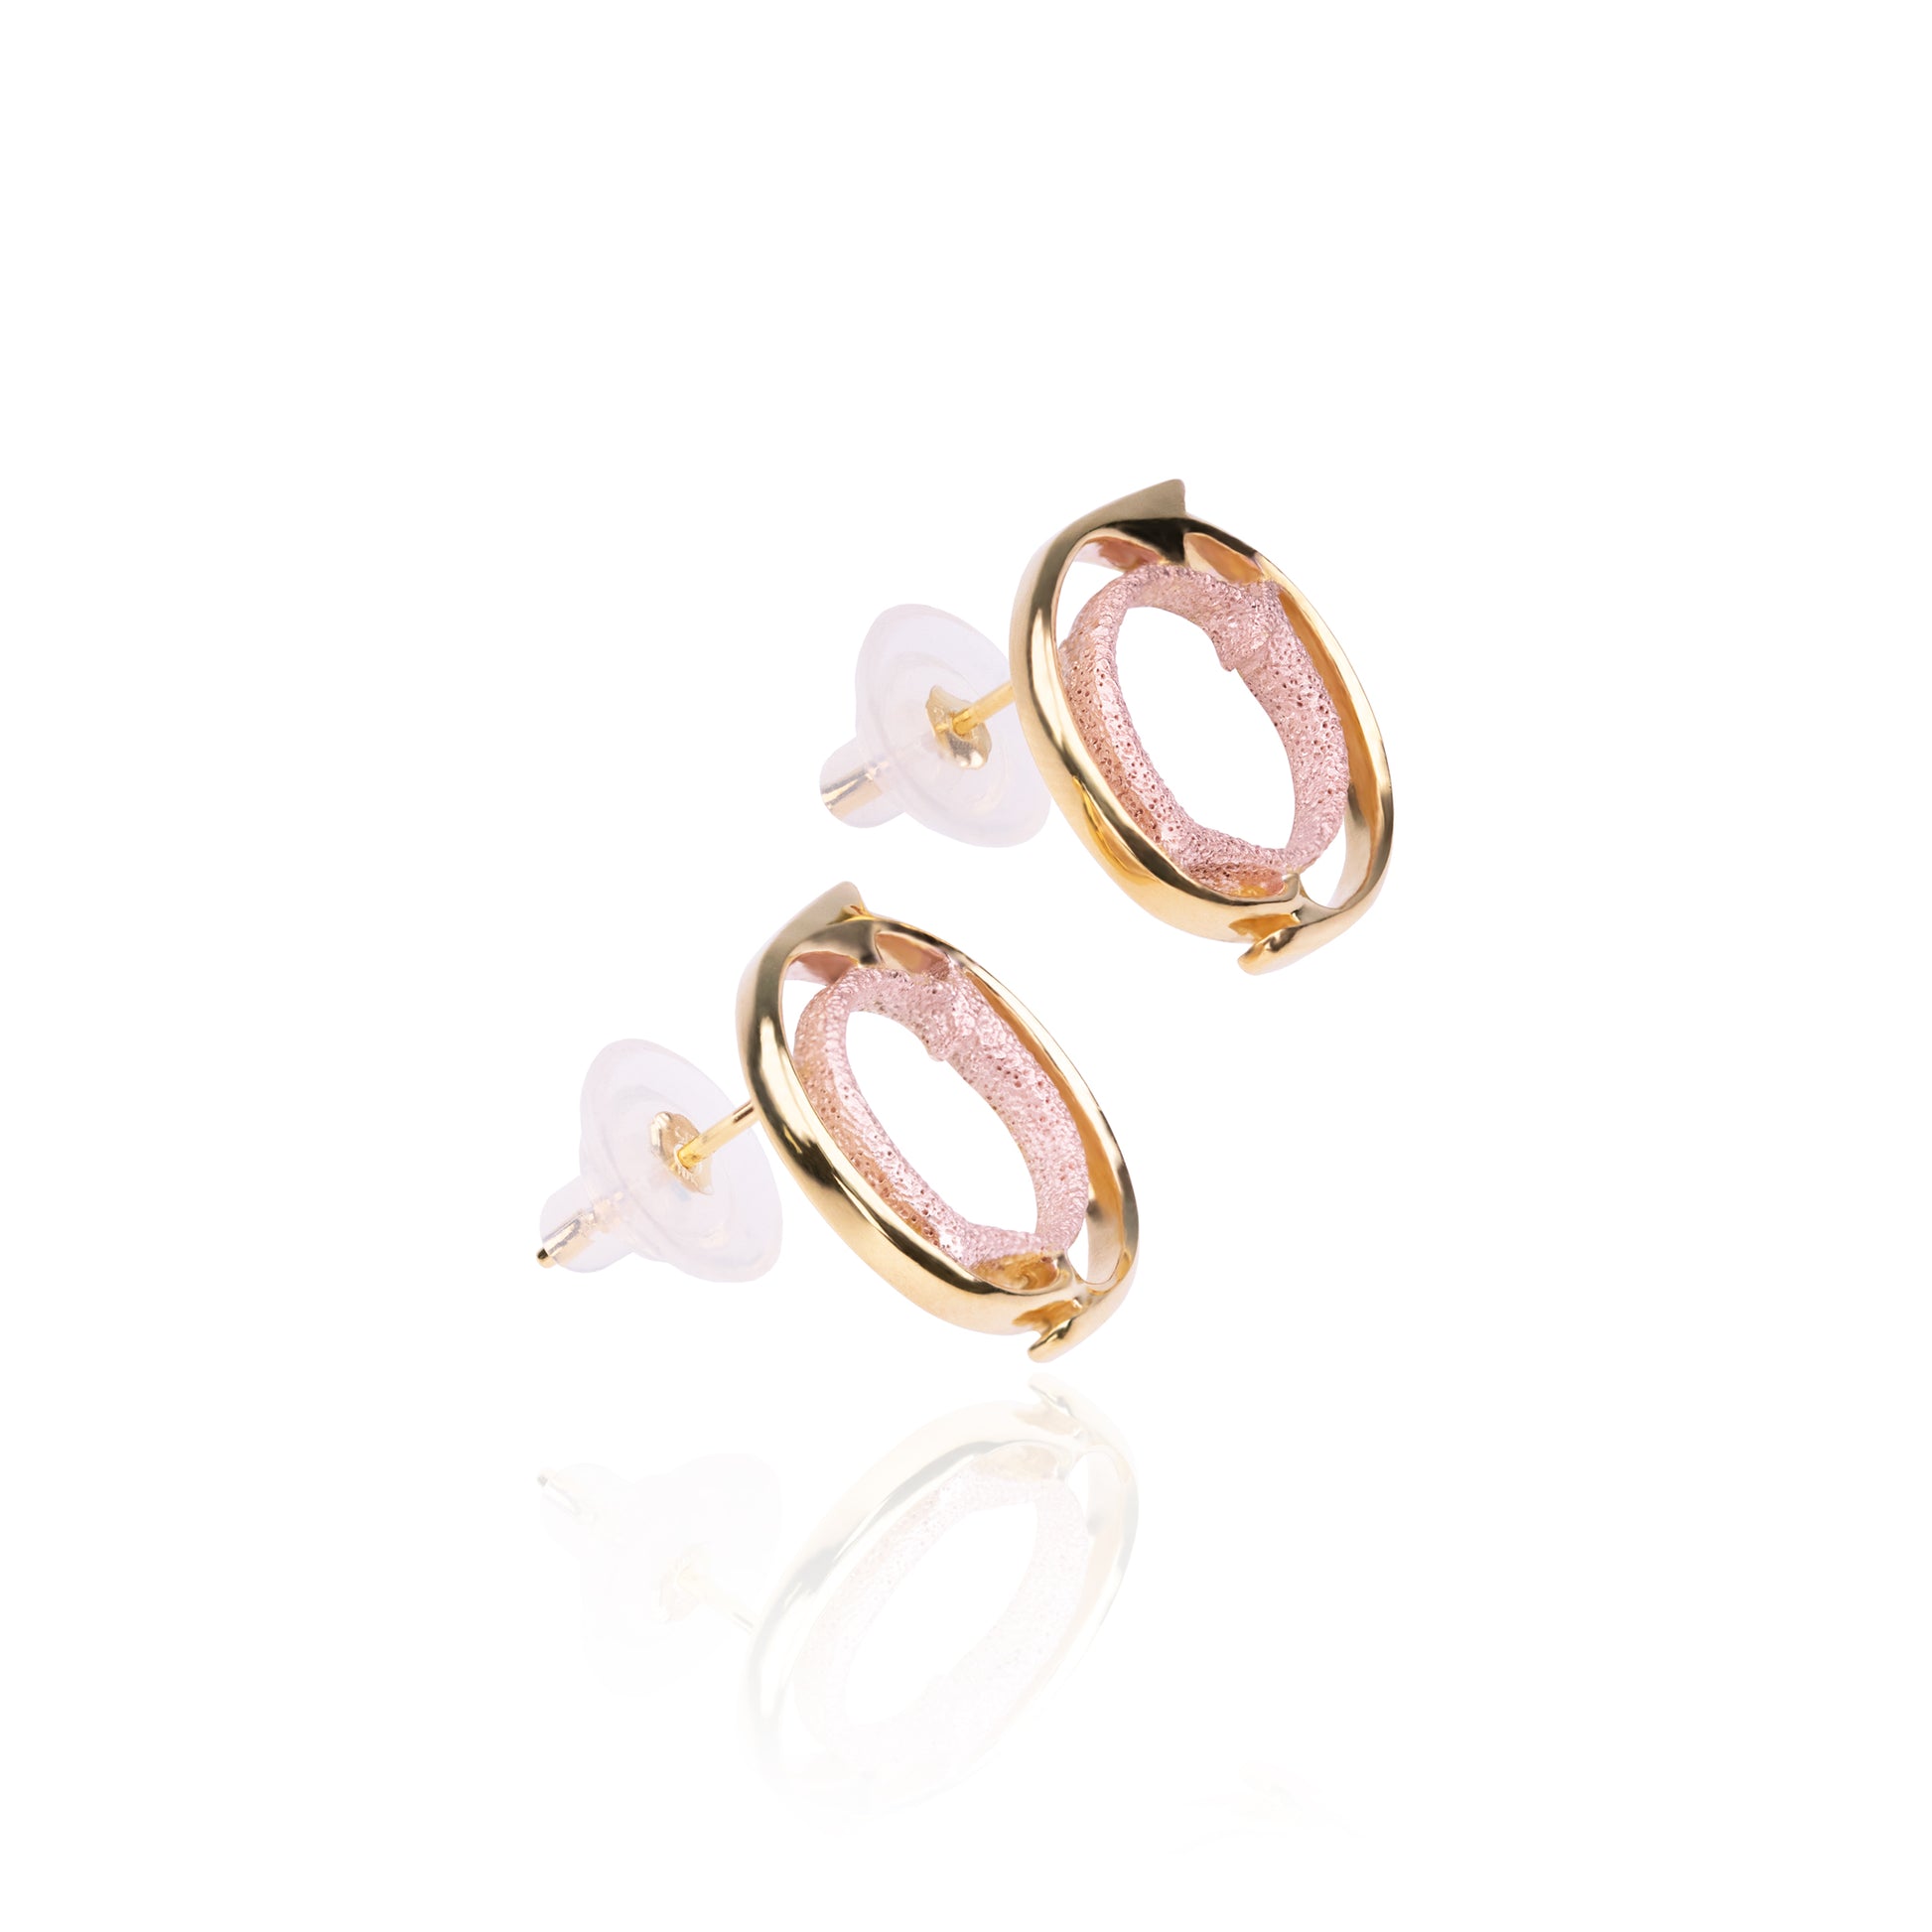 Orme-Brown Contemporary Fine Jewellery ethical Sunset Small halo stud earrings in sustainable recycled silver with gold plating